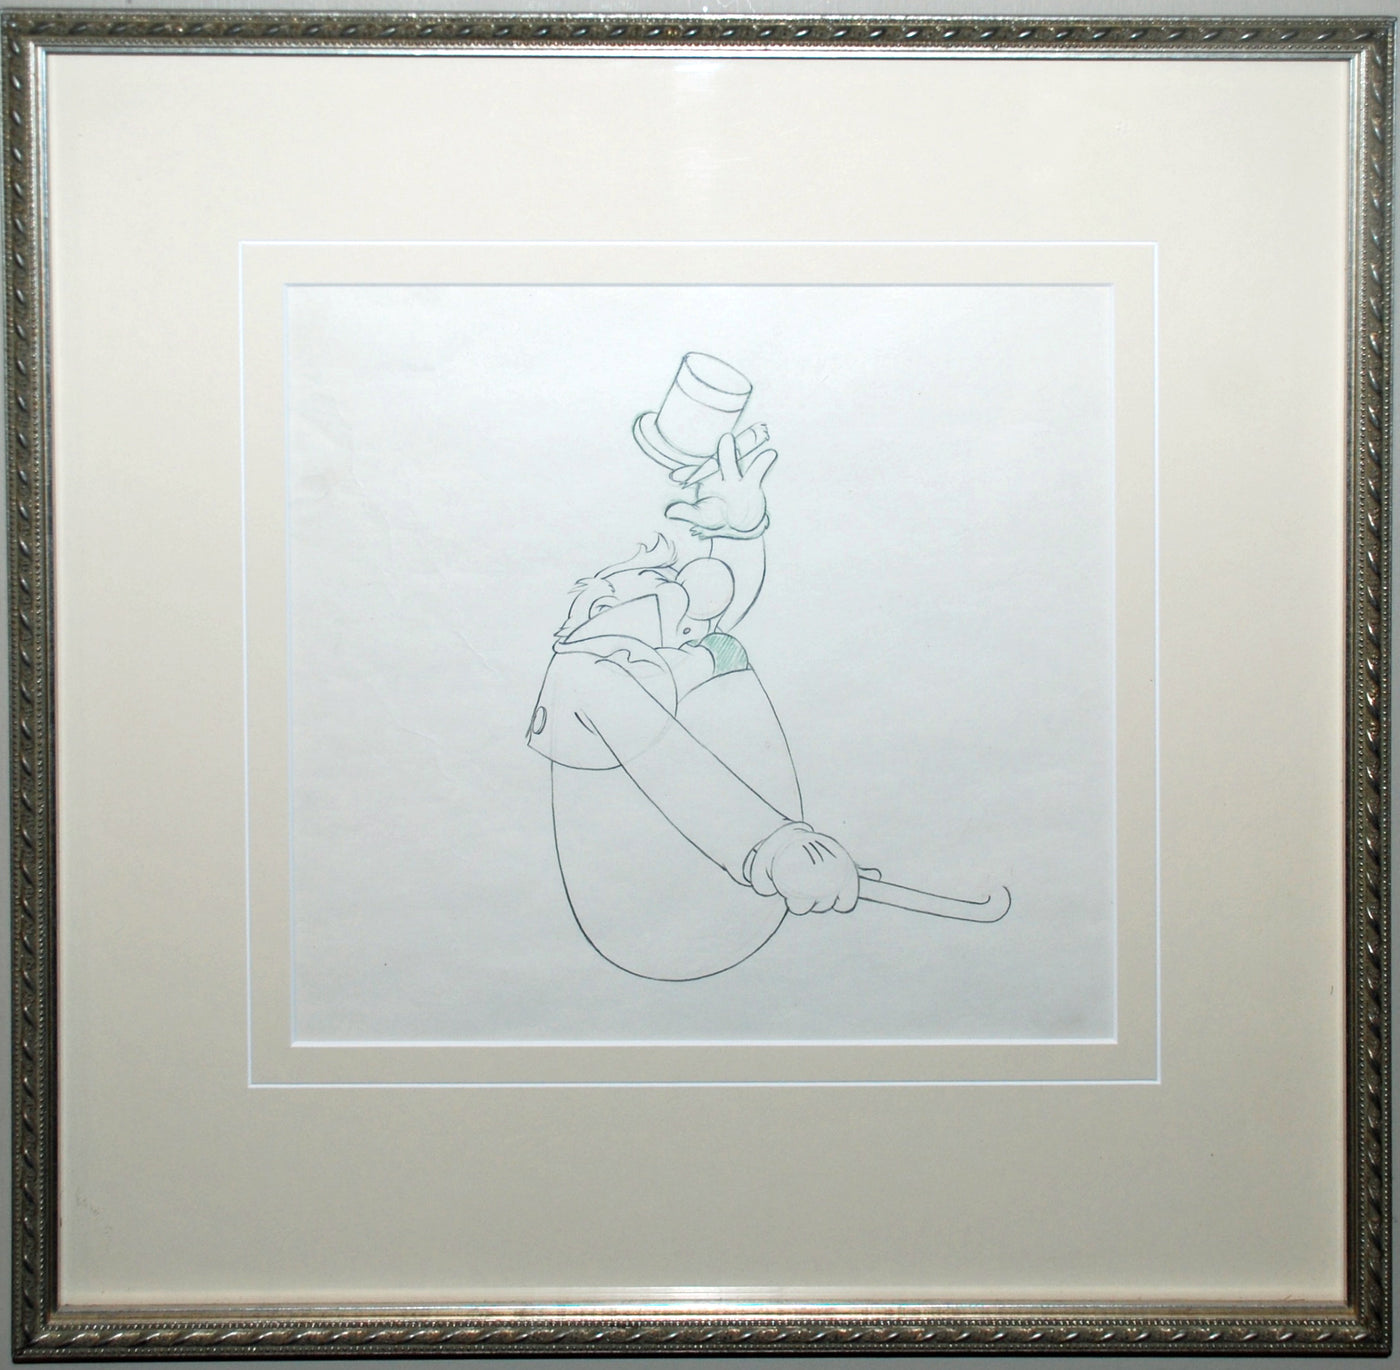 Original Walt Disney Production Drawing from Mother Goose Goes Hollywood featuring W.C. Fields as Humpty Dumpty